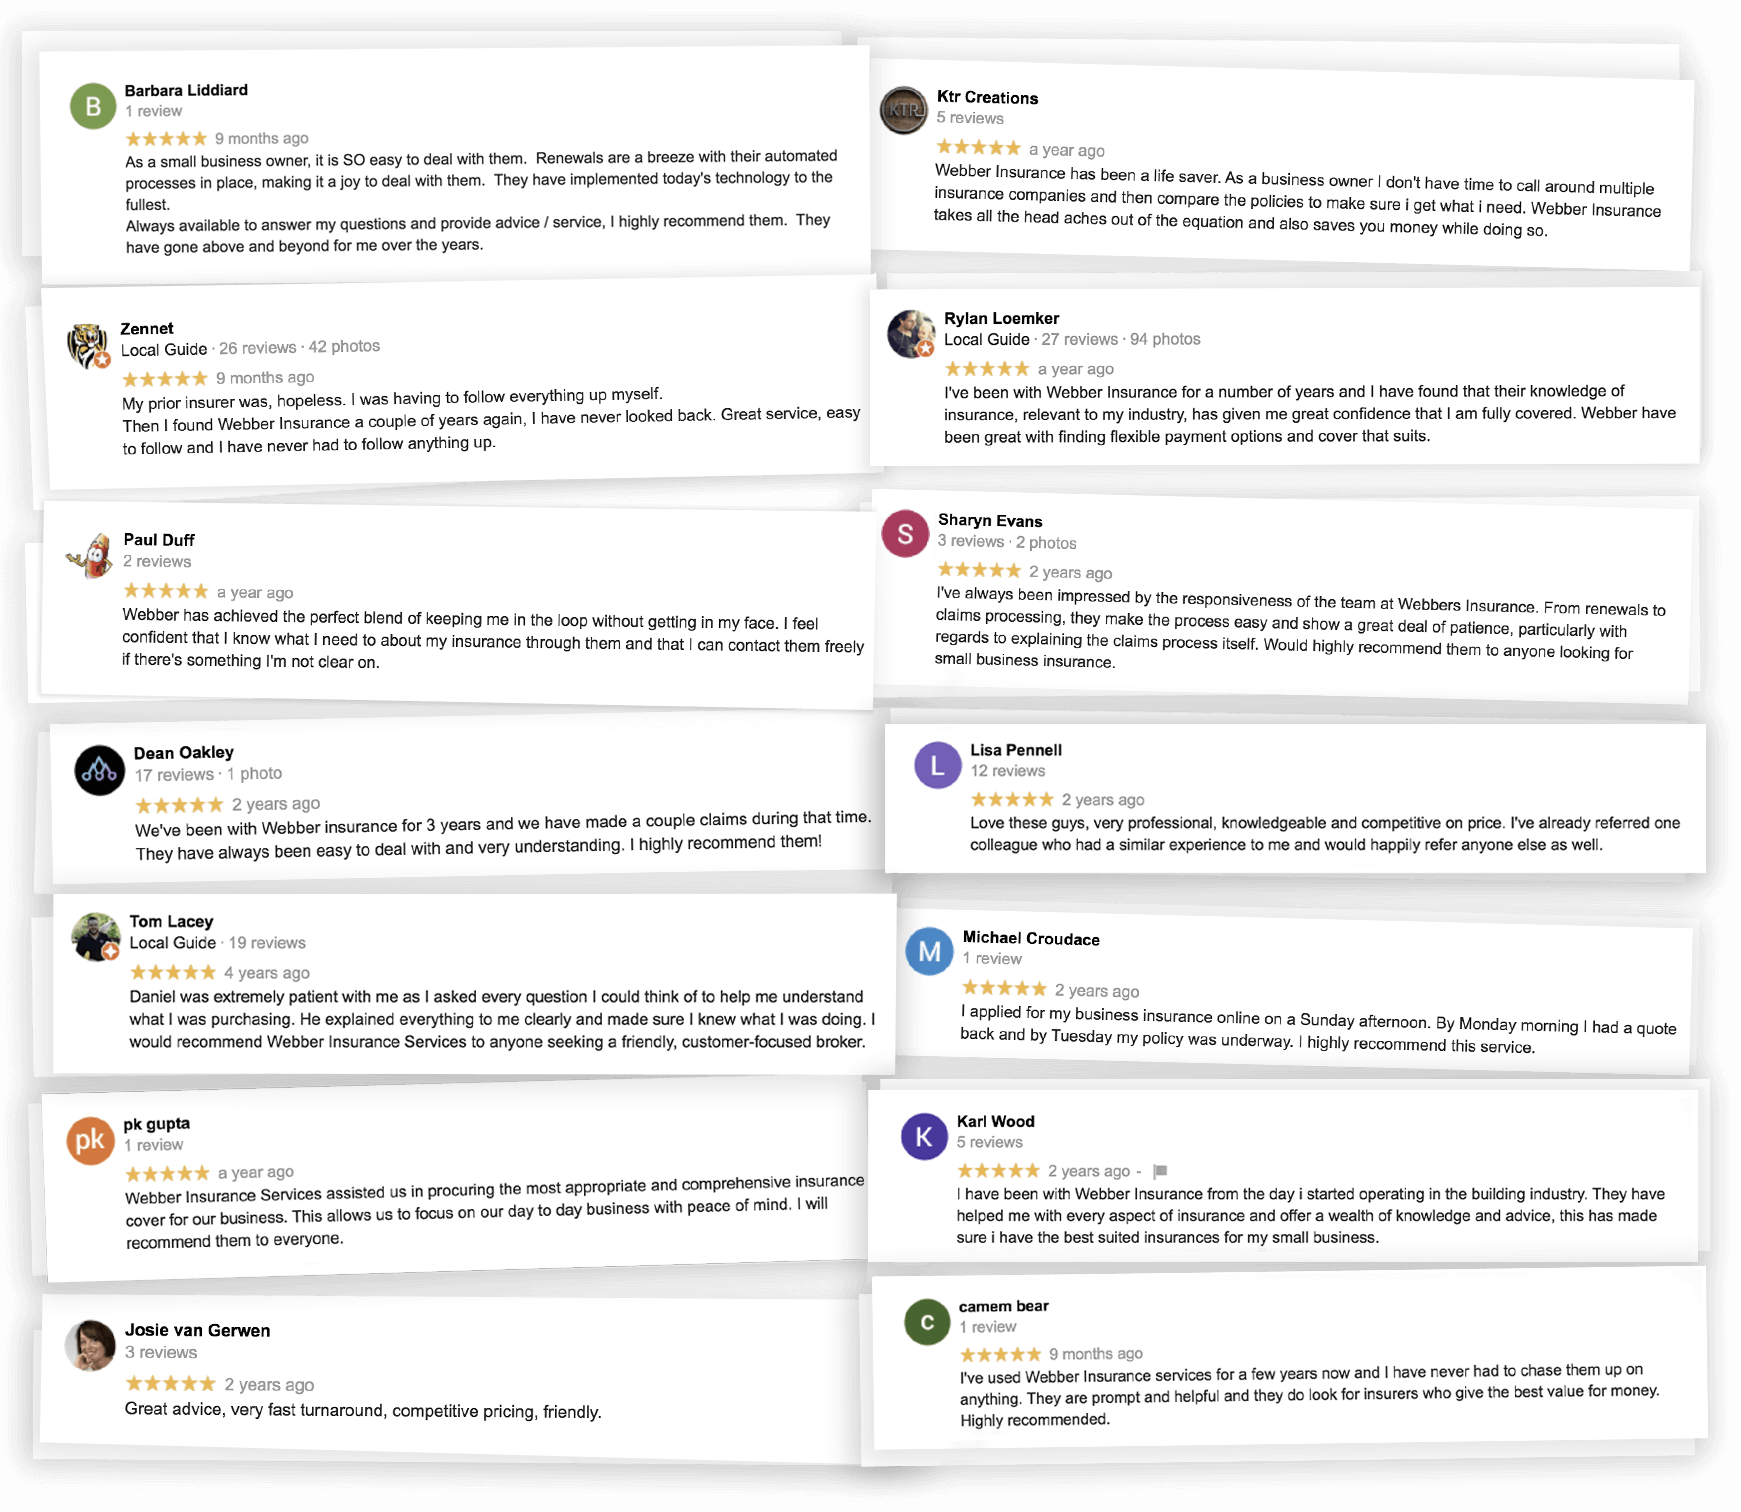 A collage of several customer reviews, each with a star rating, profile photo, user name, and the detailed text of their experience. Users express their satisfaction with great service, friendly staff, and efficient handling of claims. Ratings are generally high, confirming consistent excellence in service.